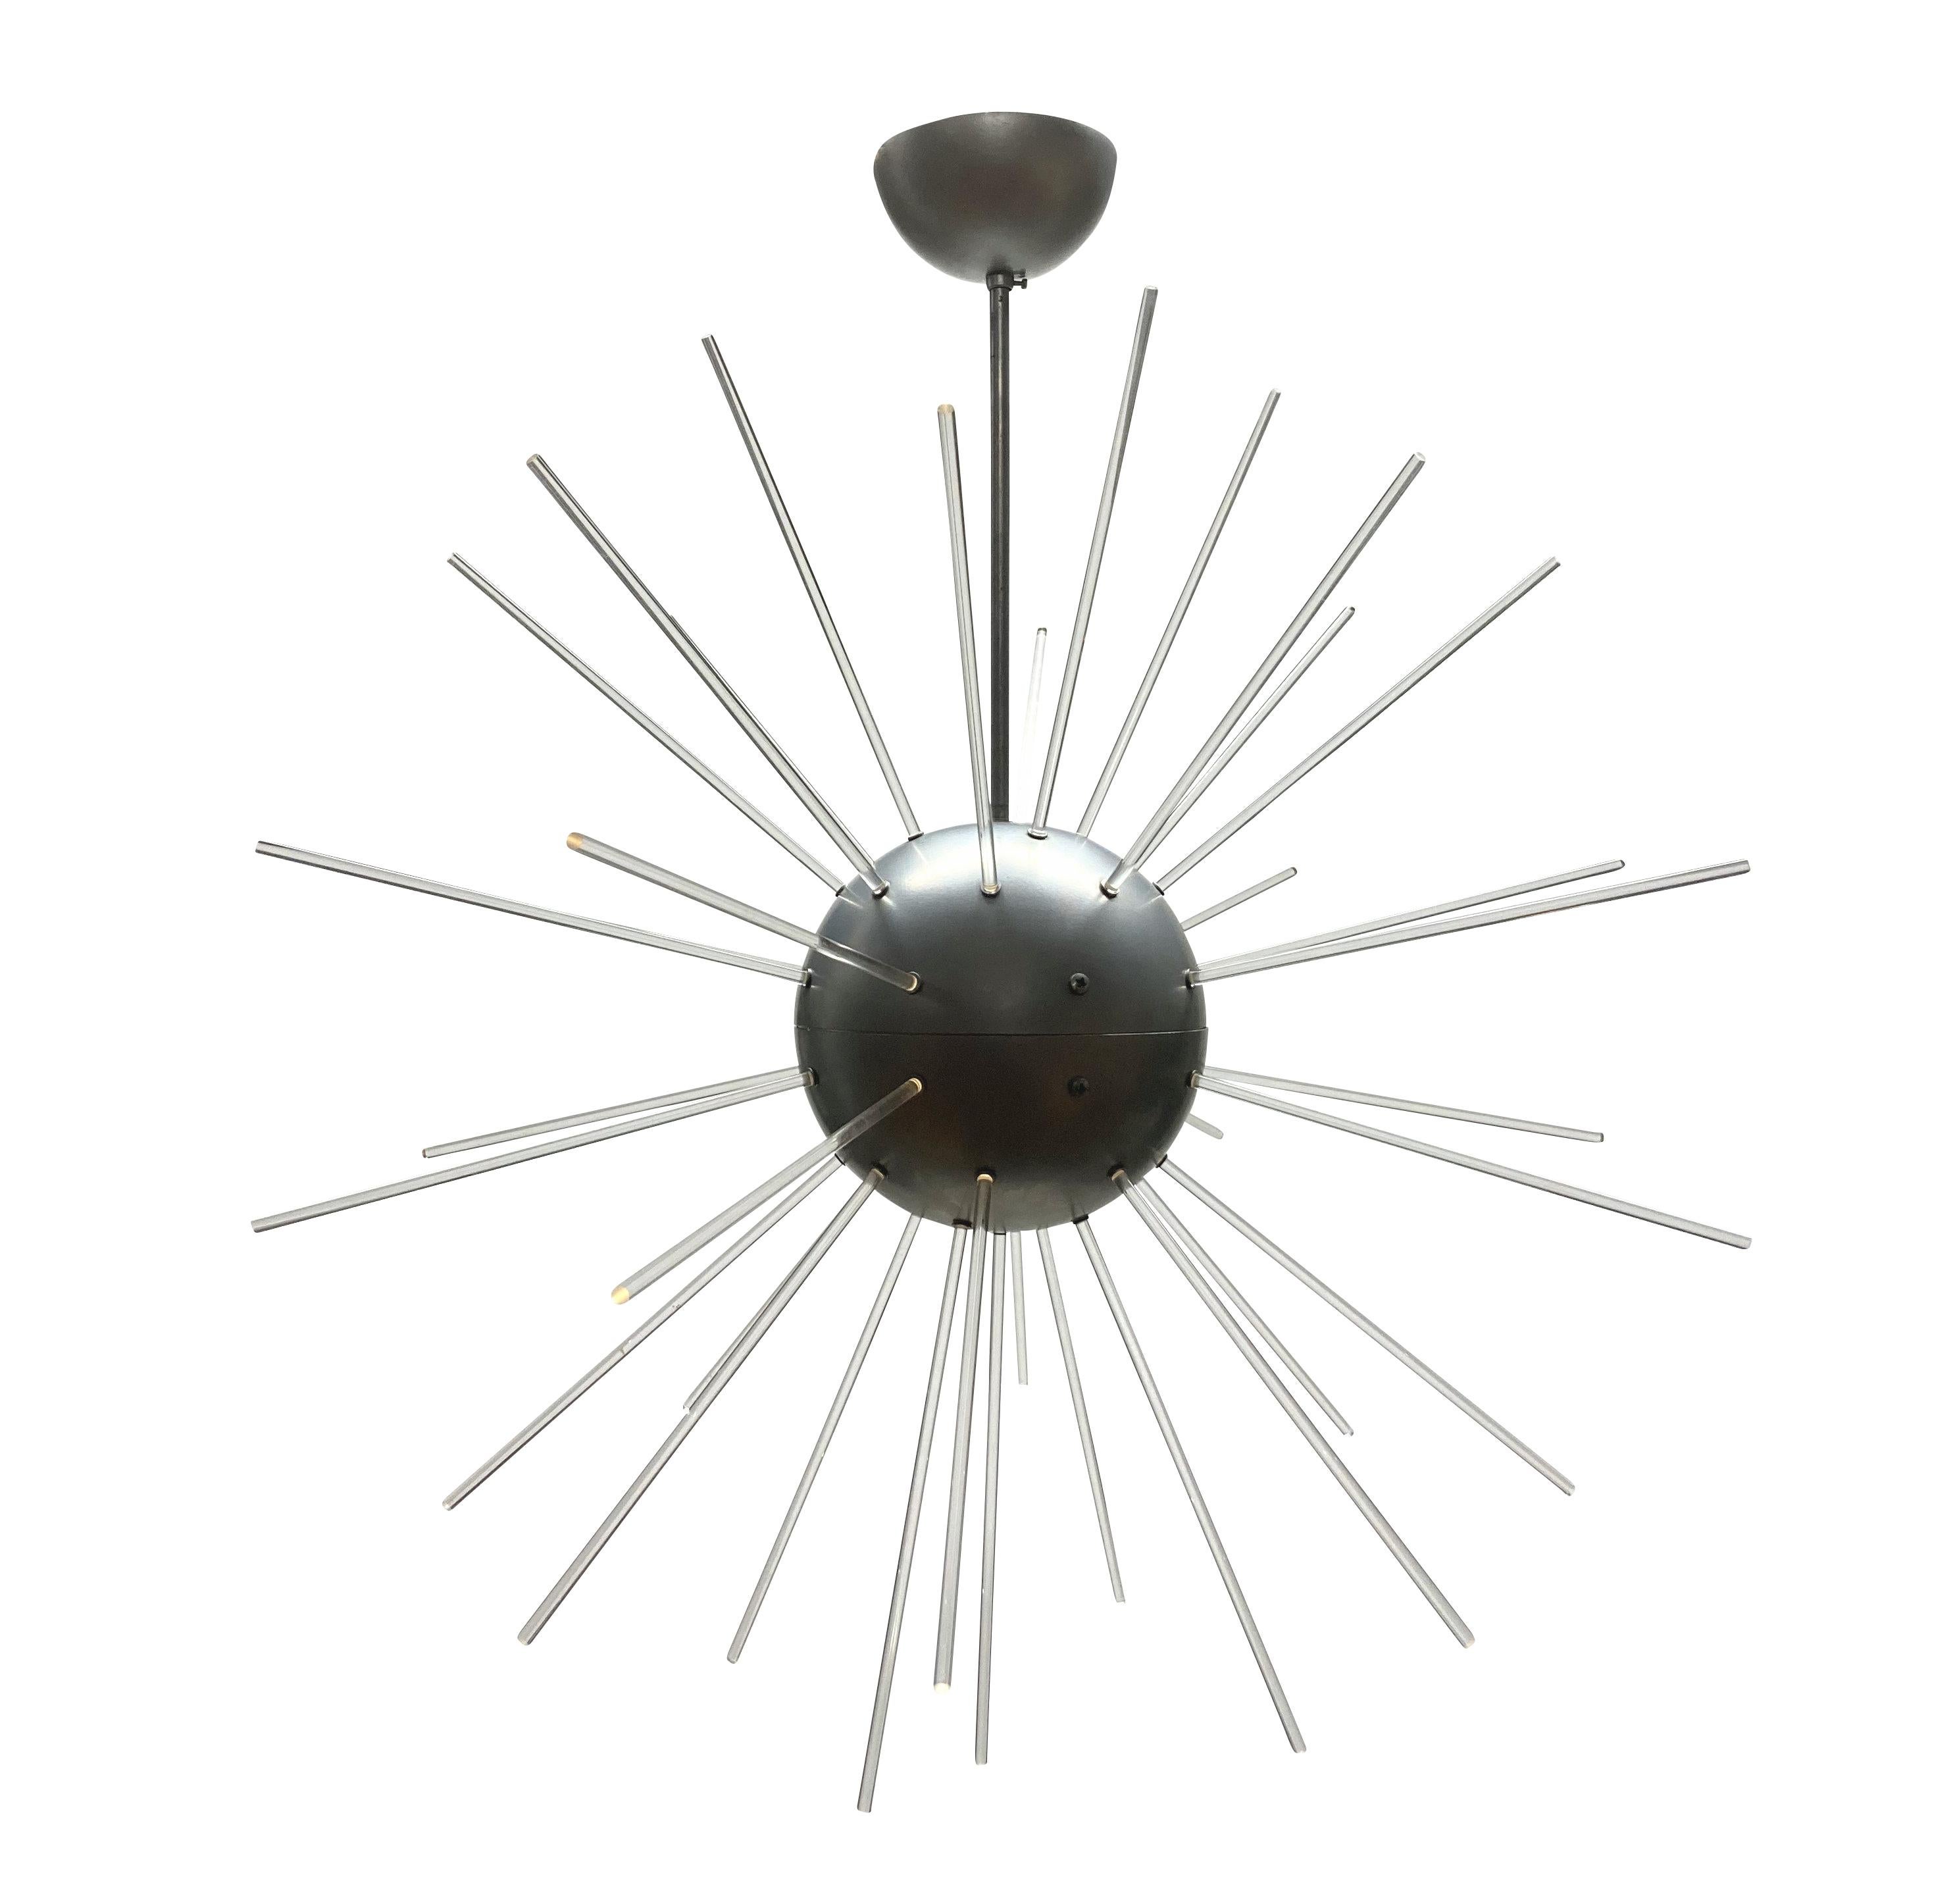 Tin Rare Pendant Light from the Collection I Soli Alchimea, by Alessandro Guerriero For Sale